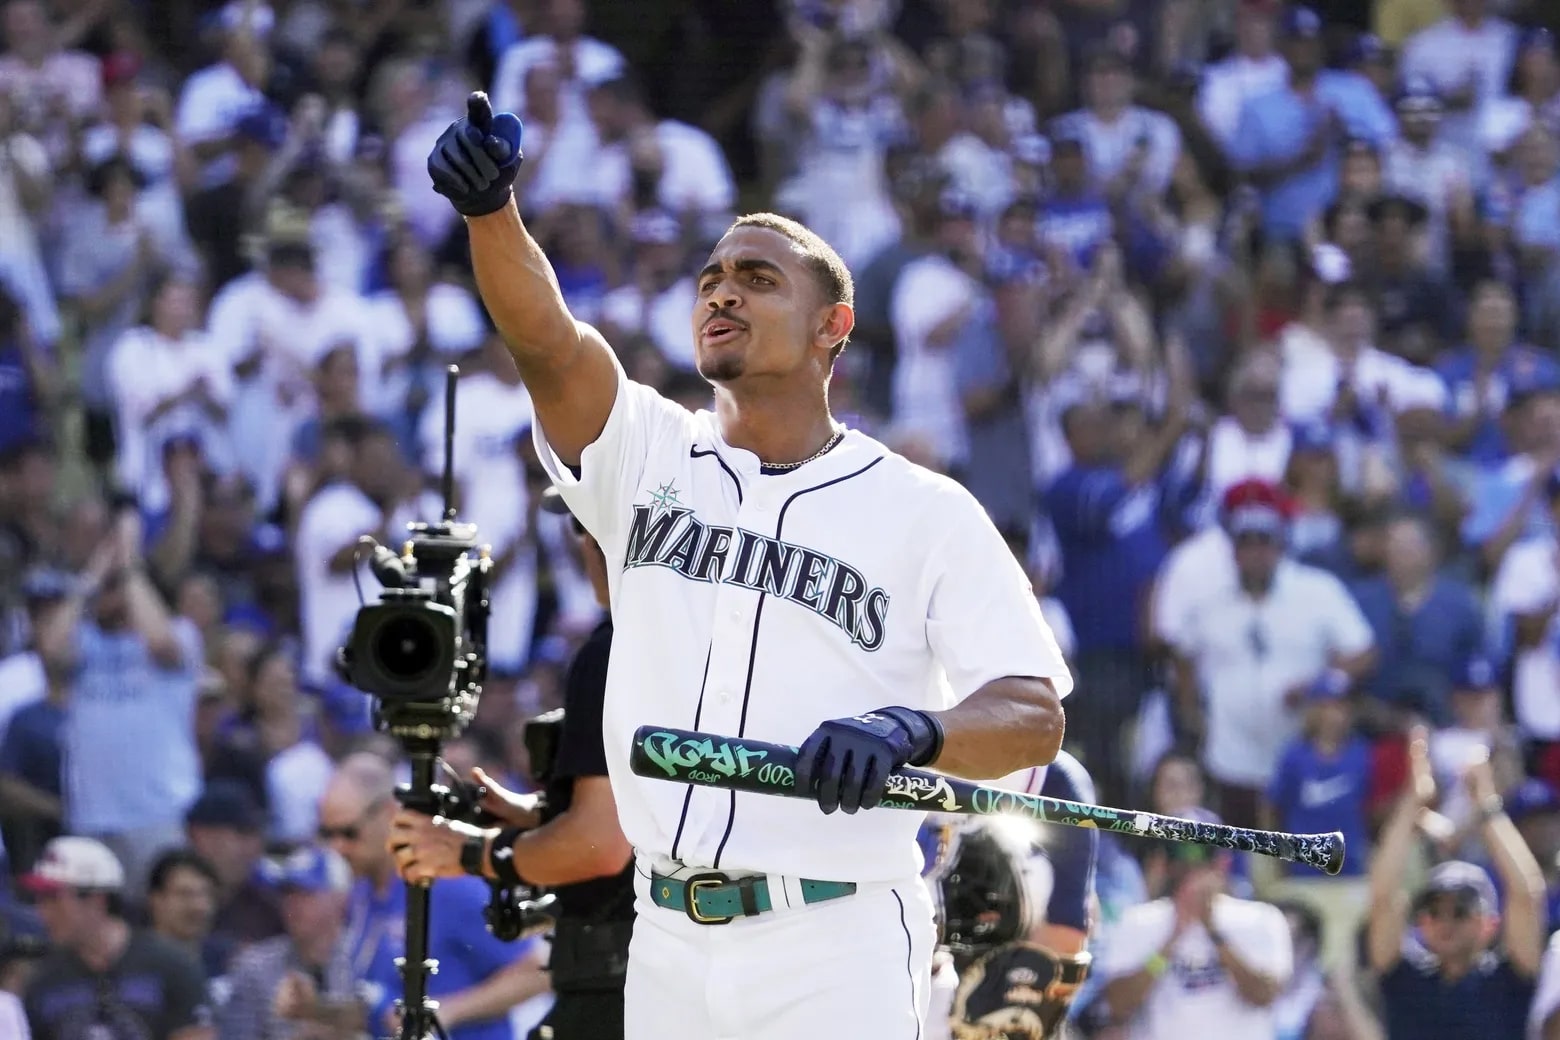 Julio Rodríguez ready for 2nd season of 'J-Rod Show' with Mariners